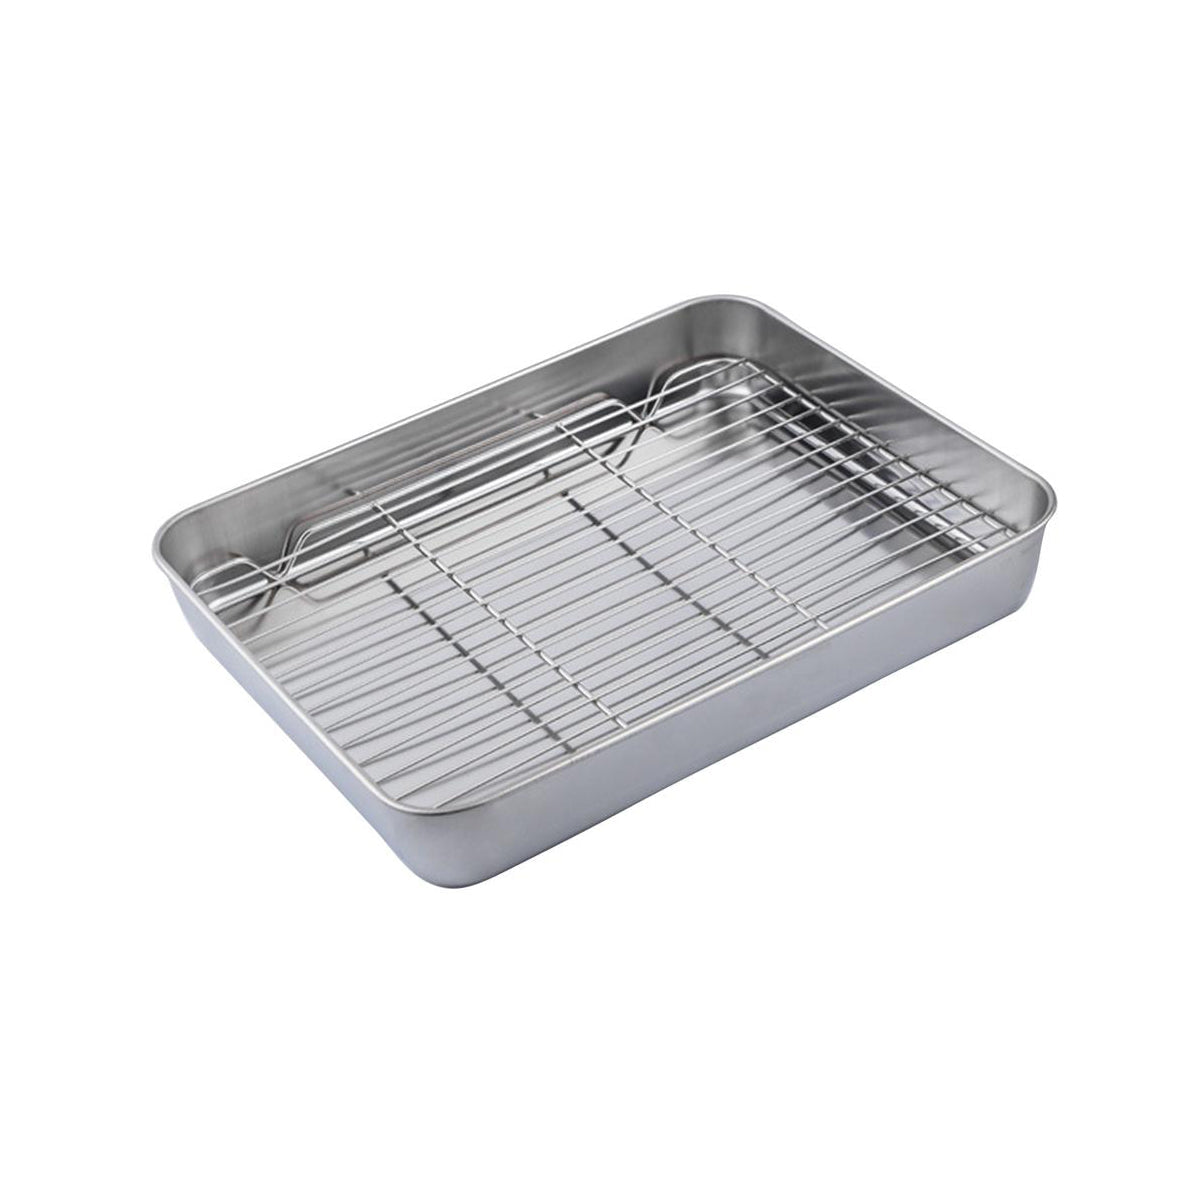 Baking Tray with Removable Rack